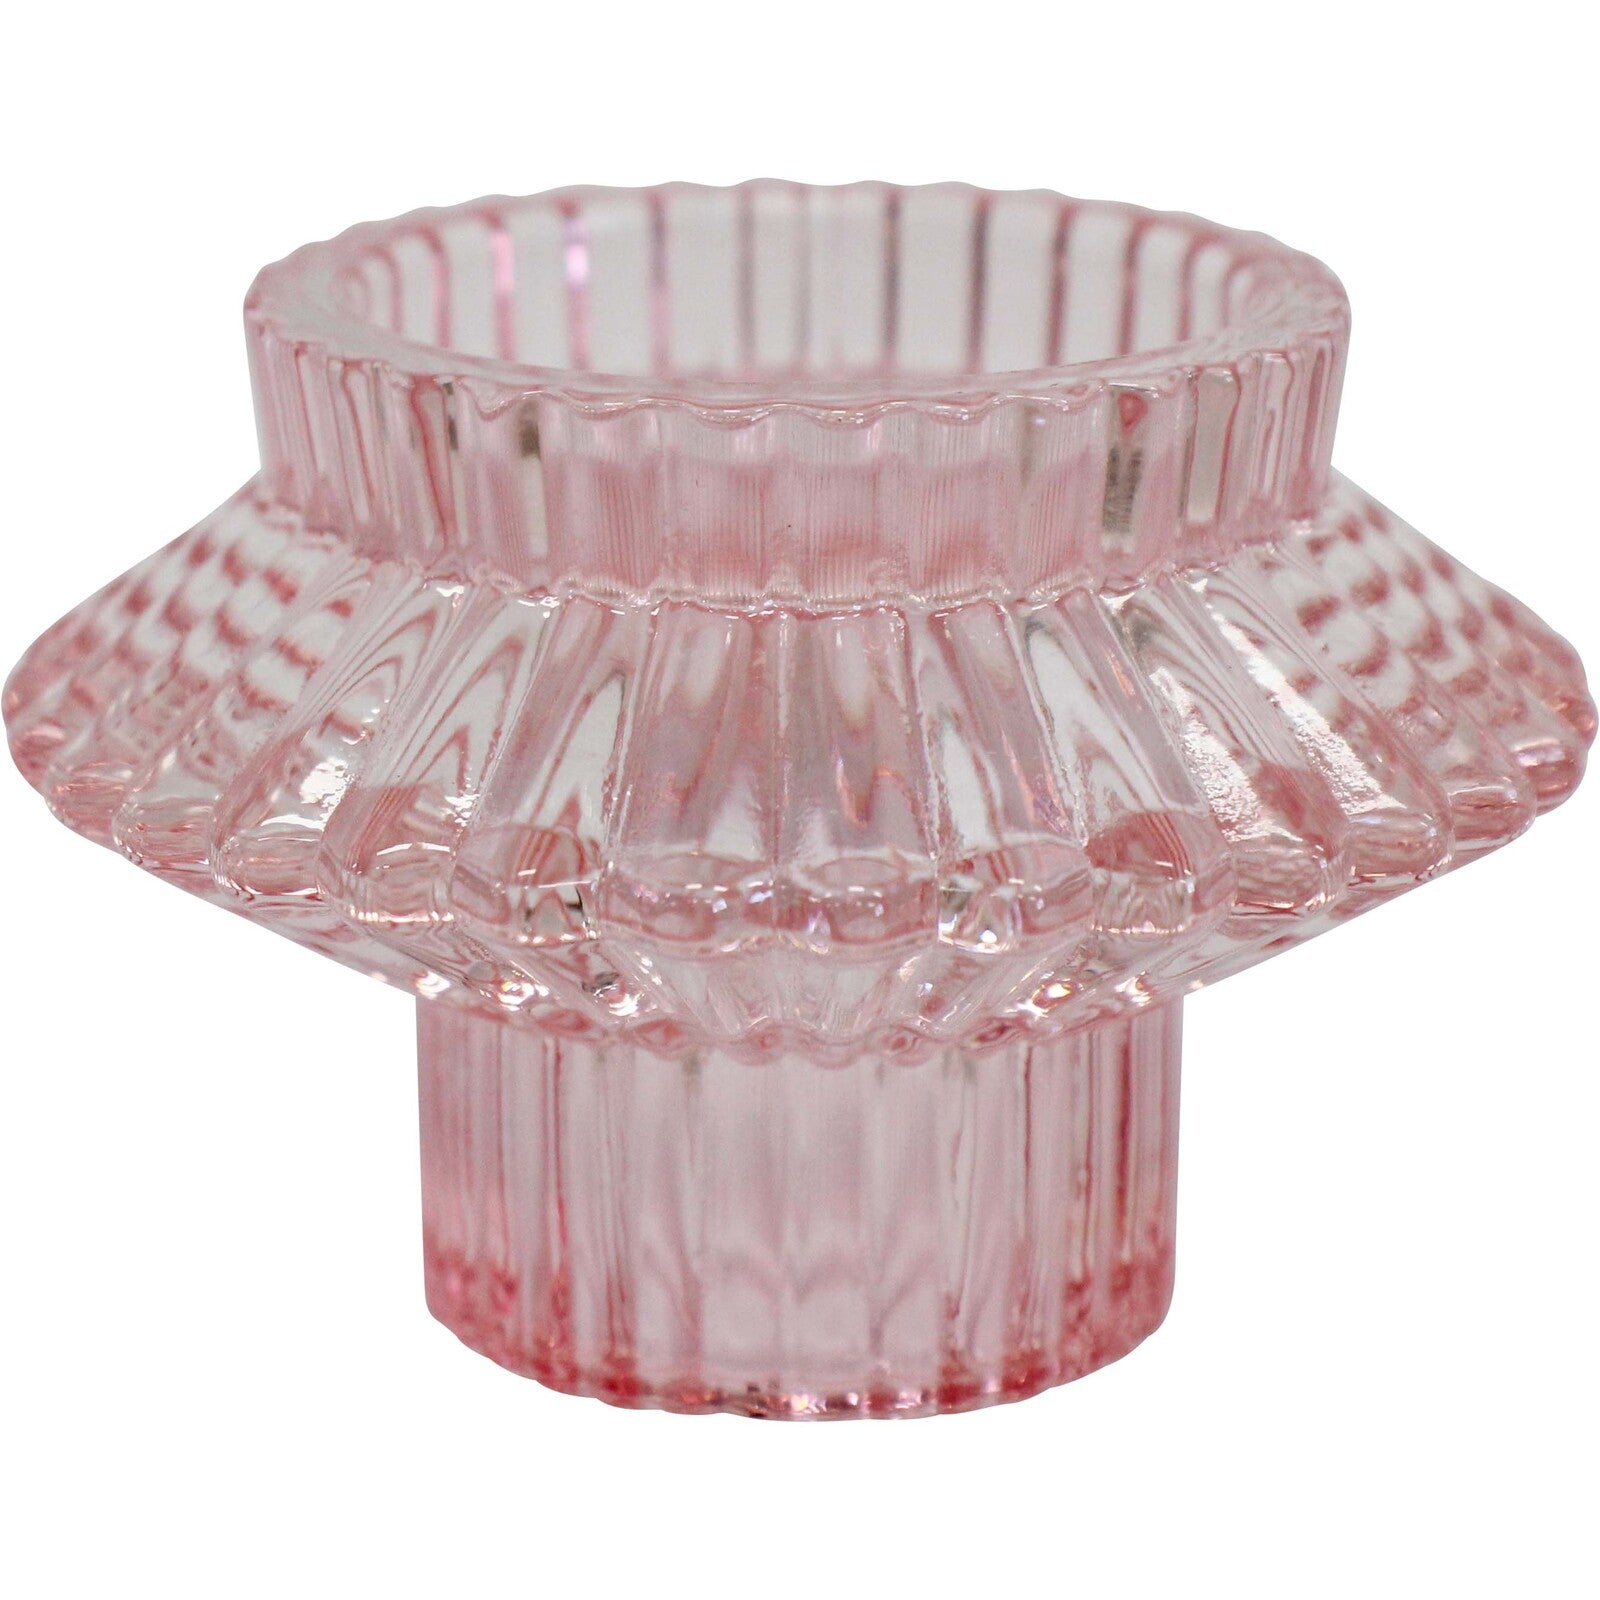 Double Sided Candle Holder Rose-Decor Items-Lavida-The Bay Room